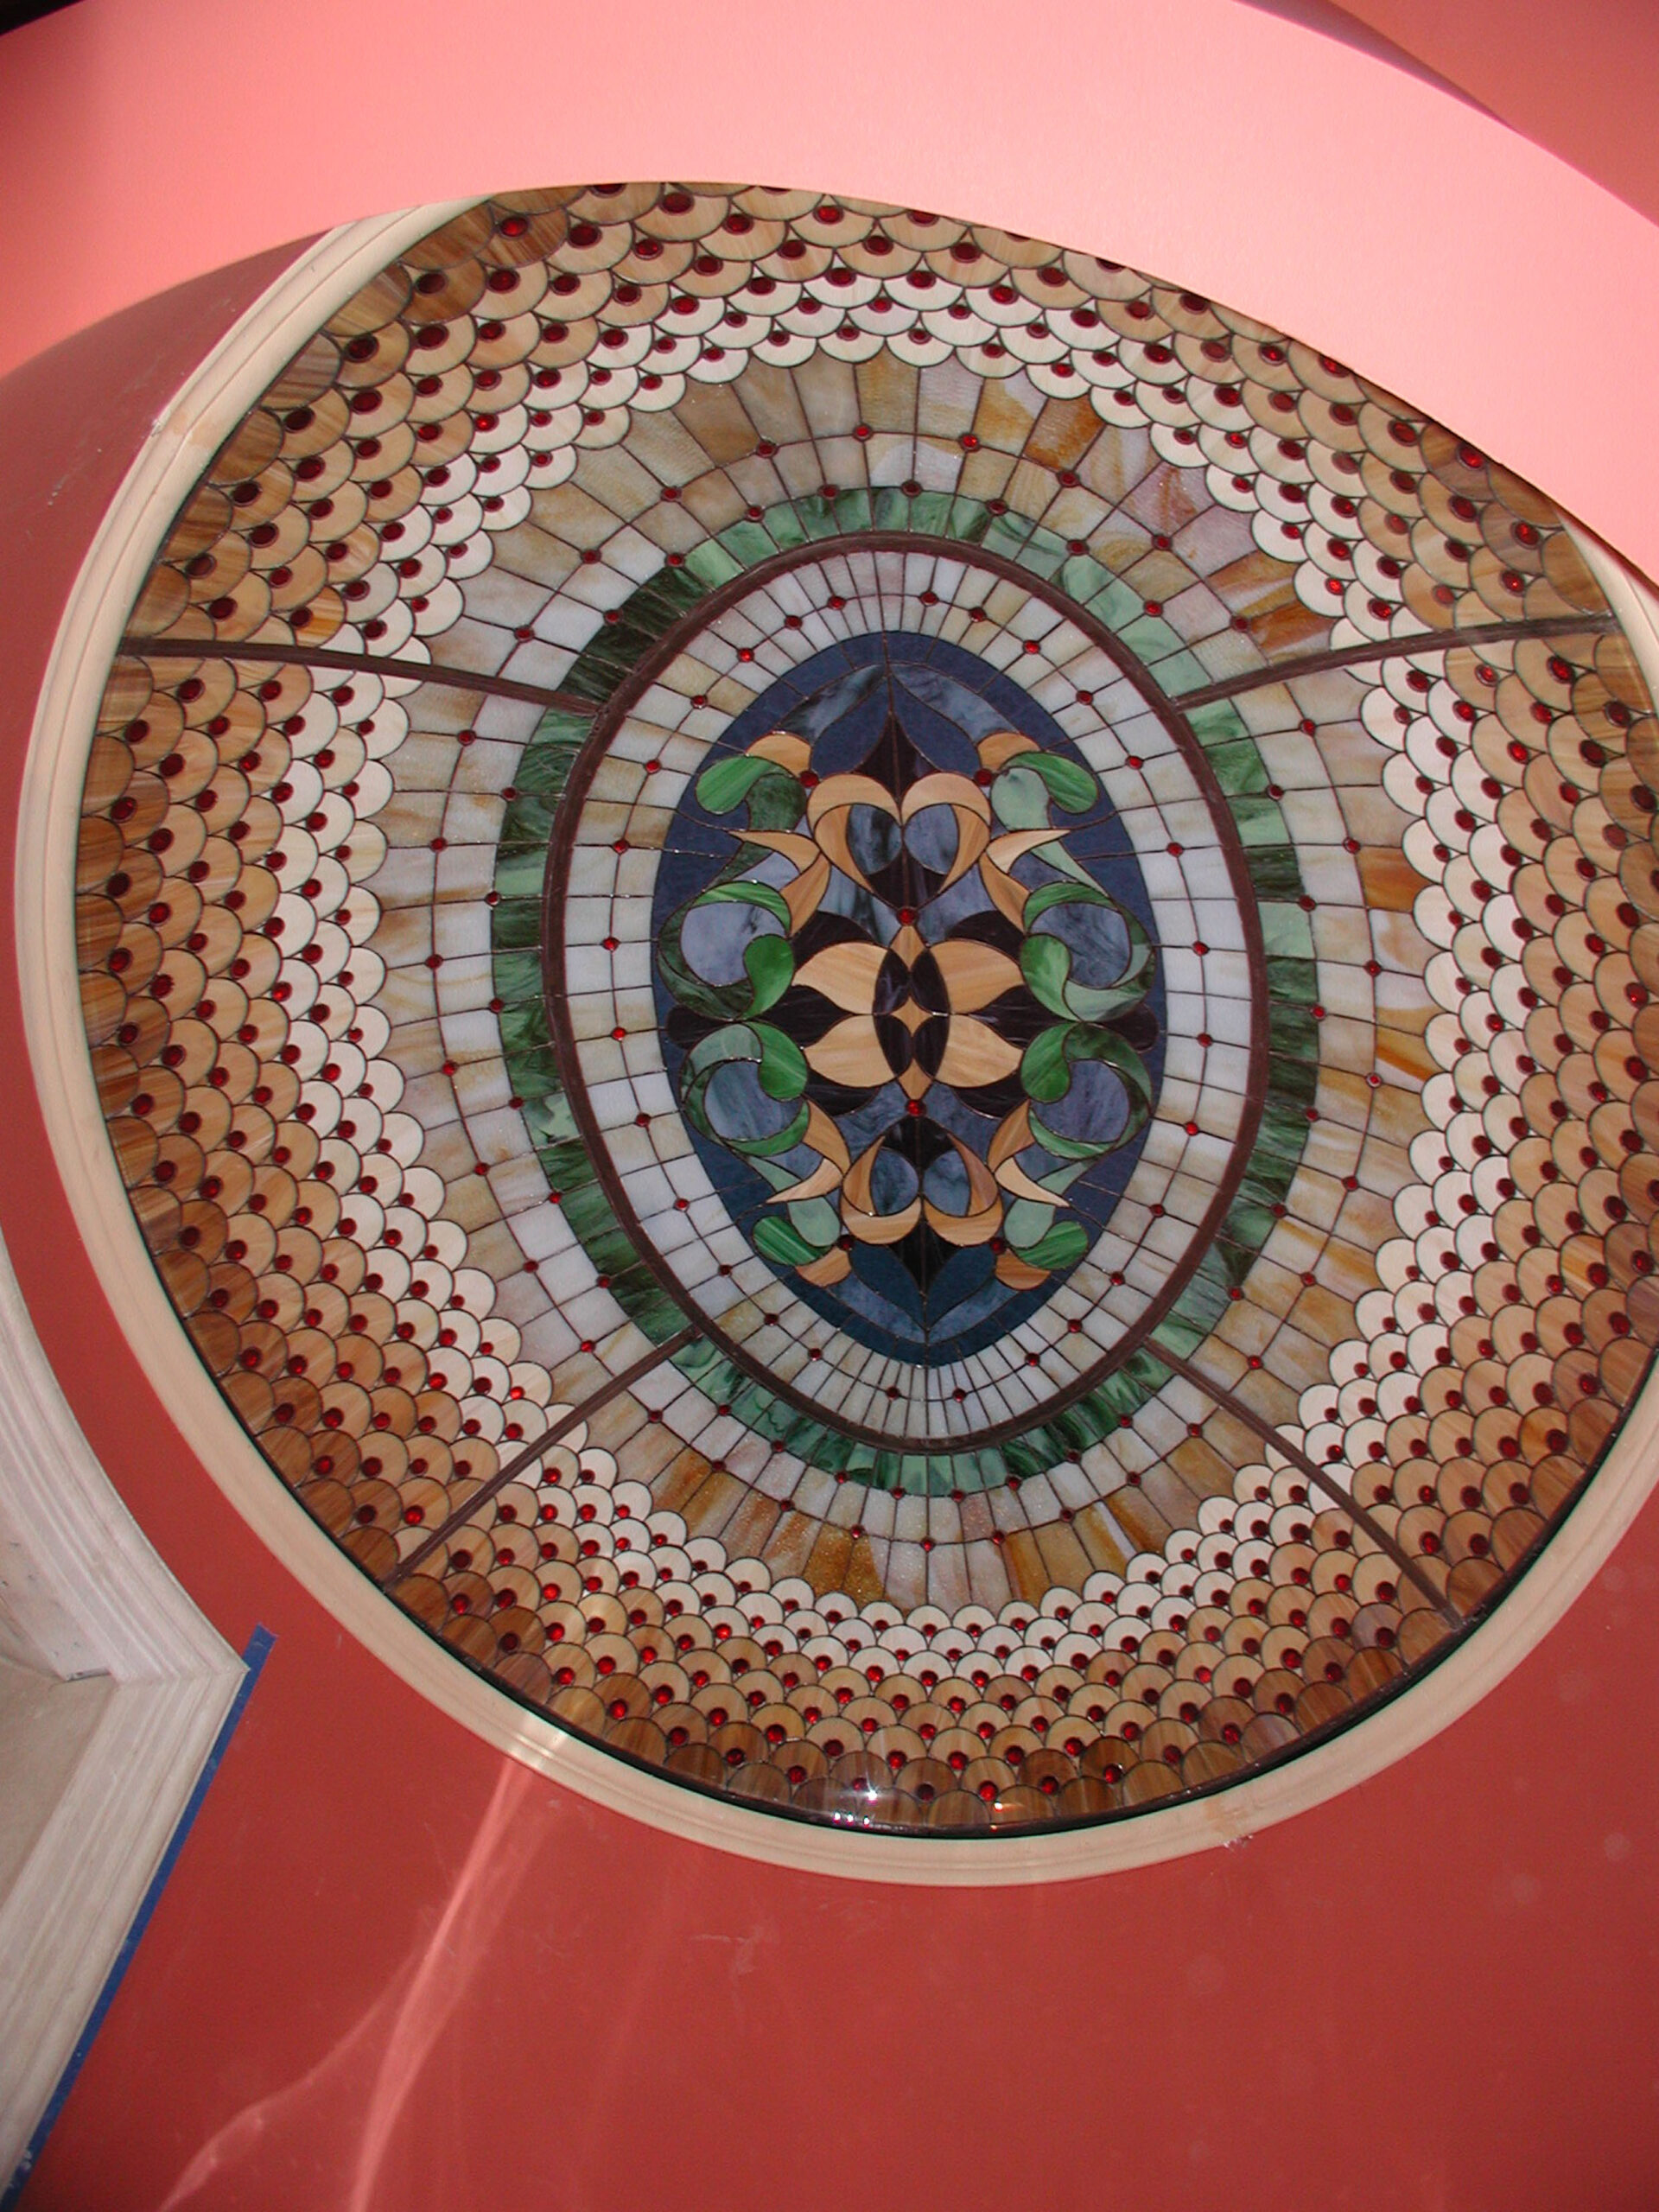 Ceiling dome with brown, beige, green, and blue glass in a Traditional style.